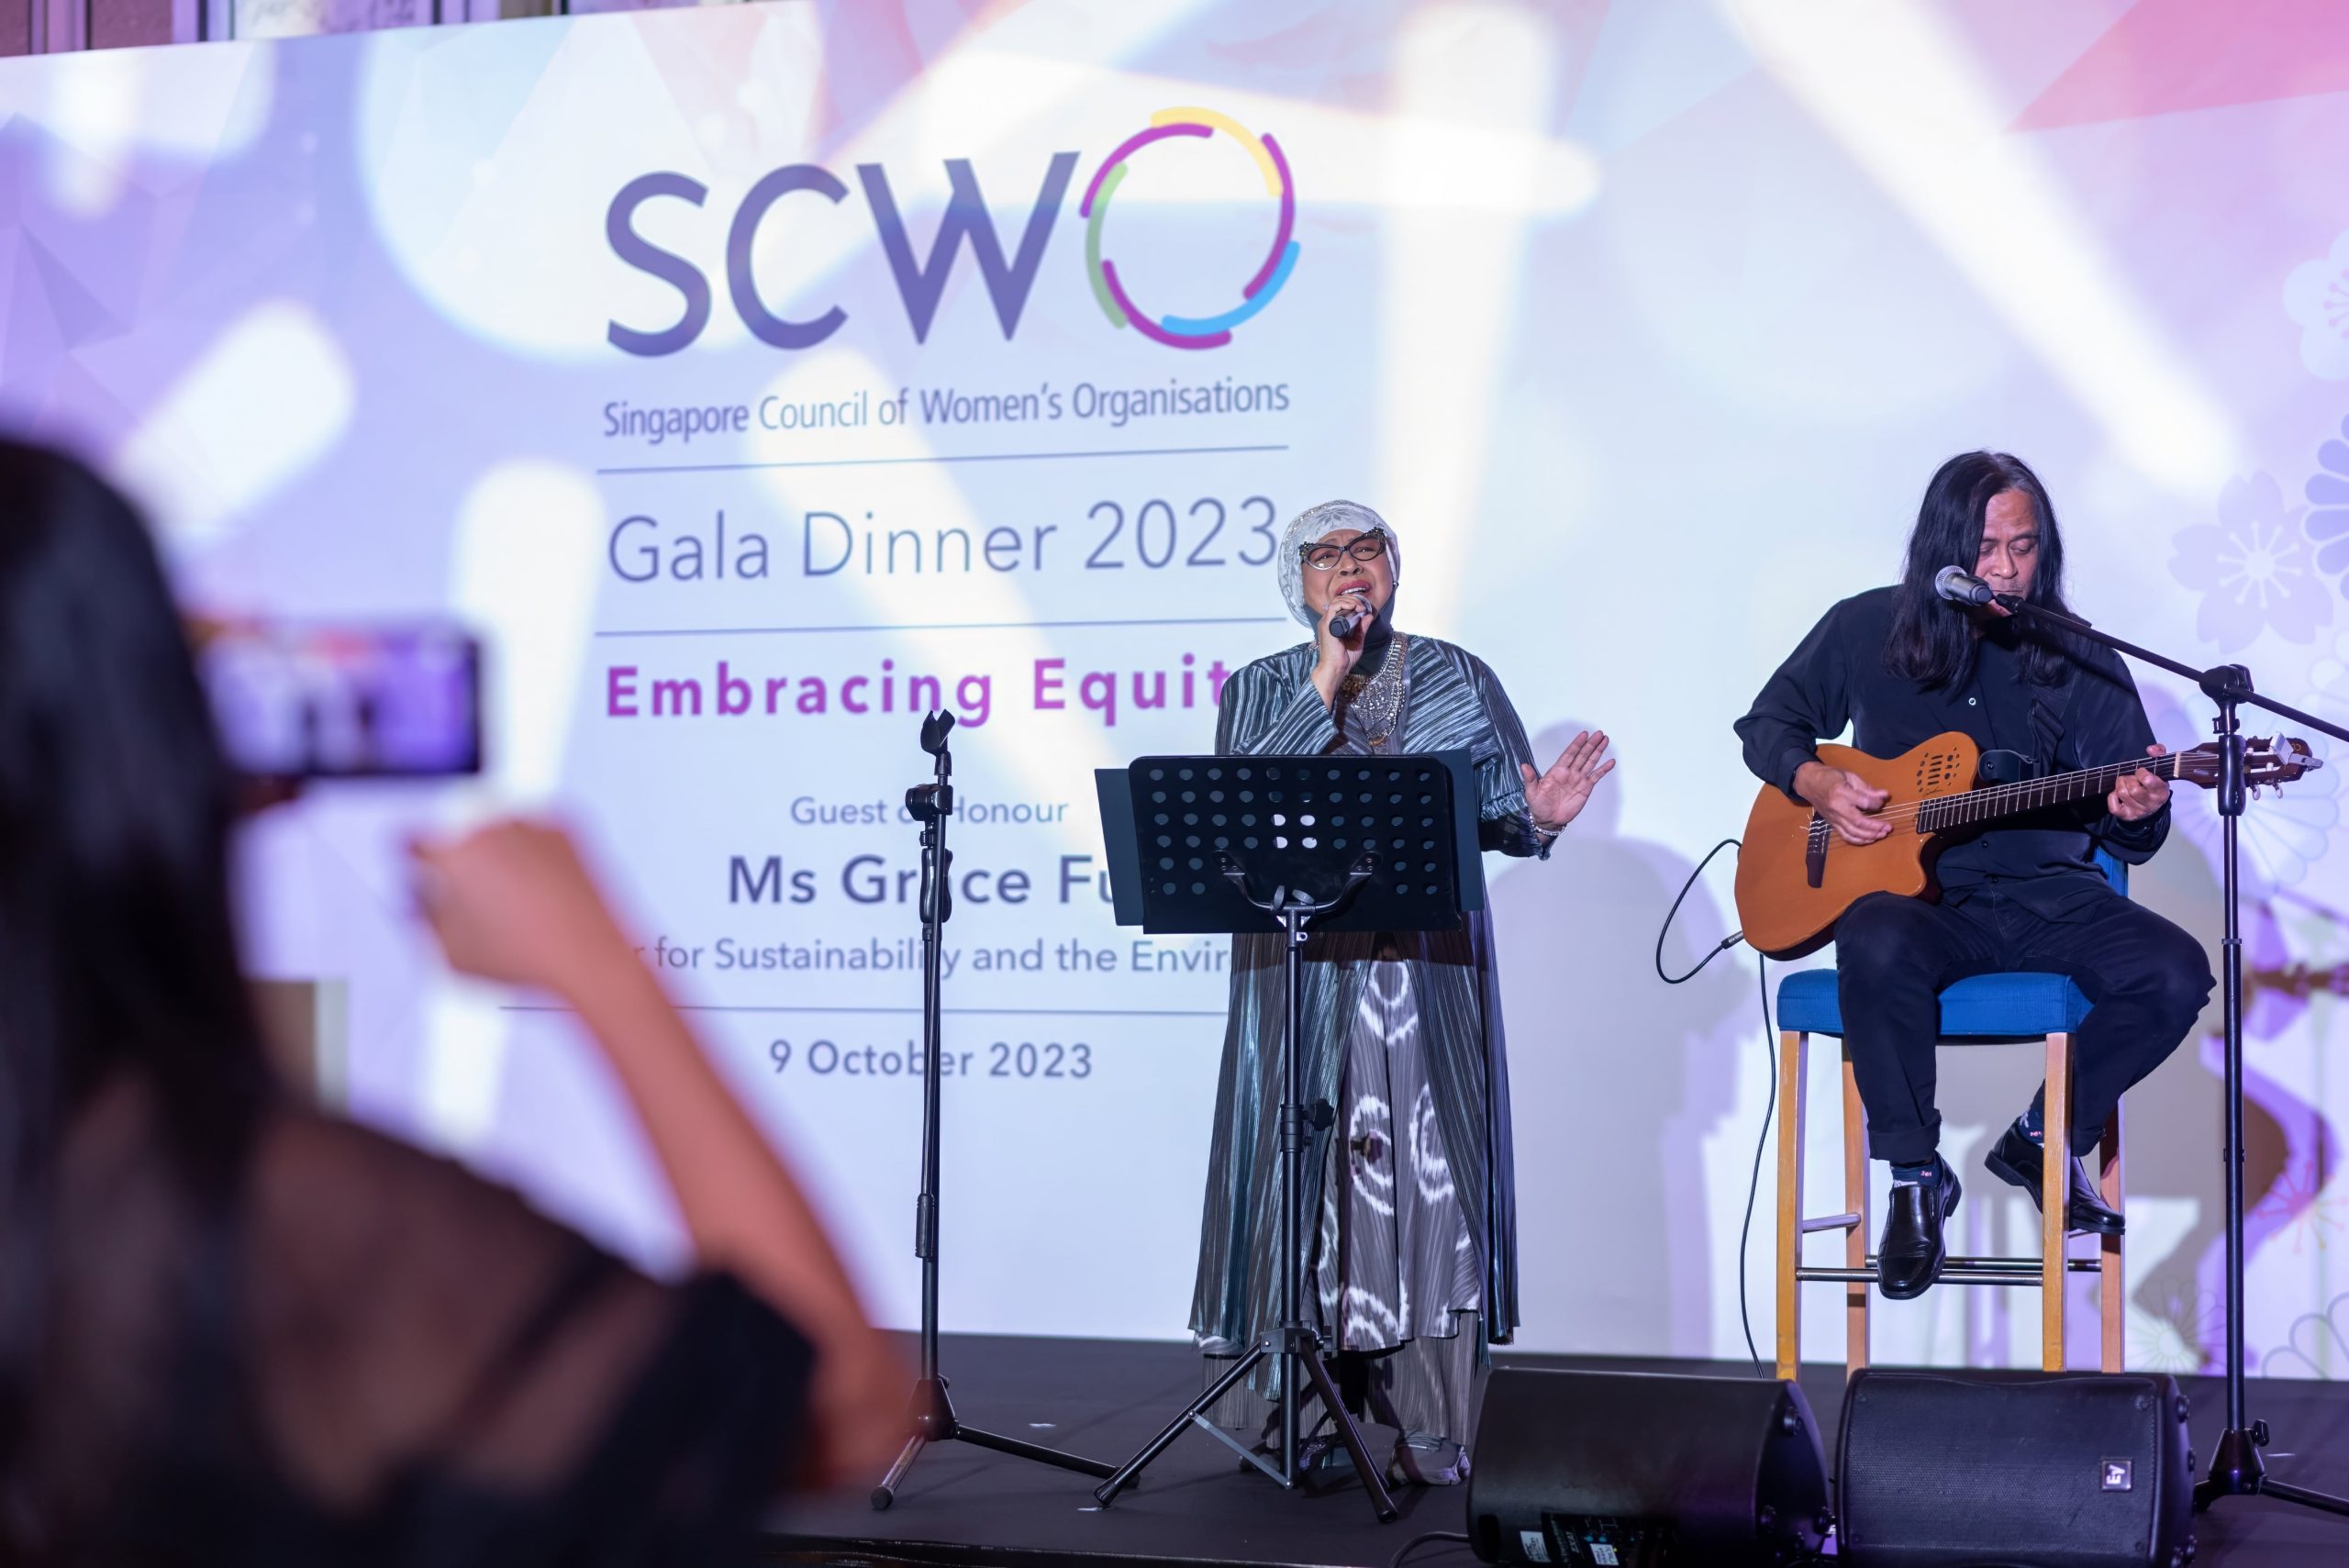 Embracing Equity at the SCWO Gala Dinner 2023